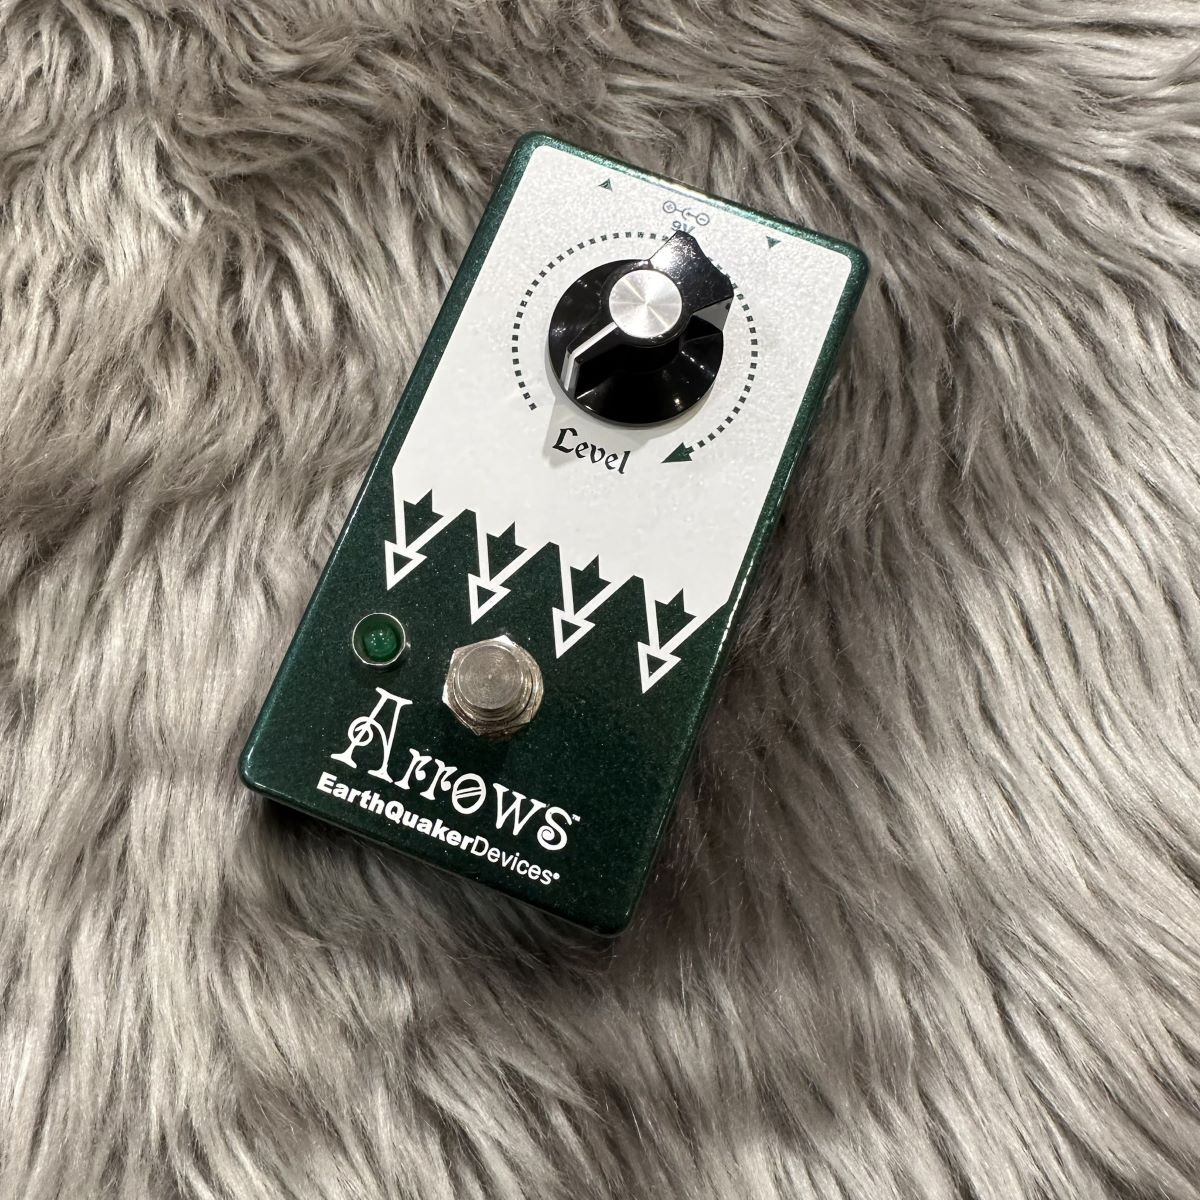 EarthQuaker Devices Arrows アースクエイカーデバイセス 【 水戸マイム店 】